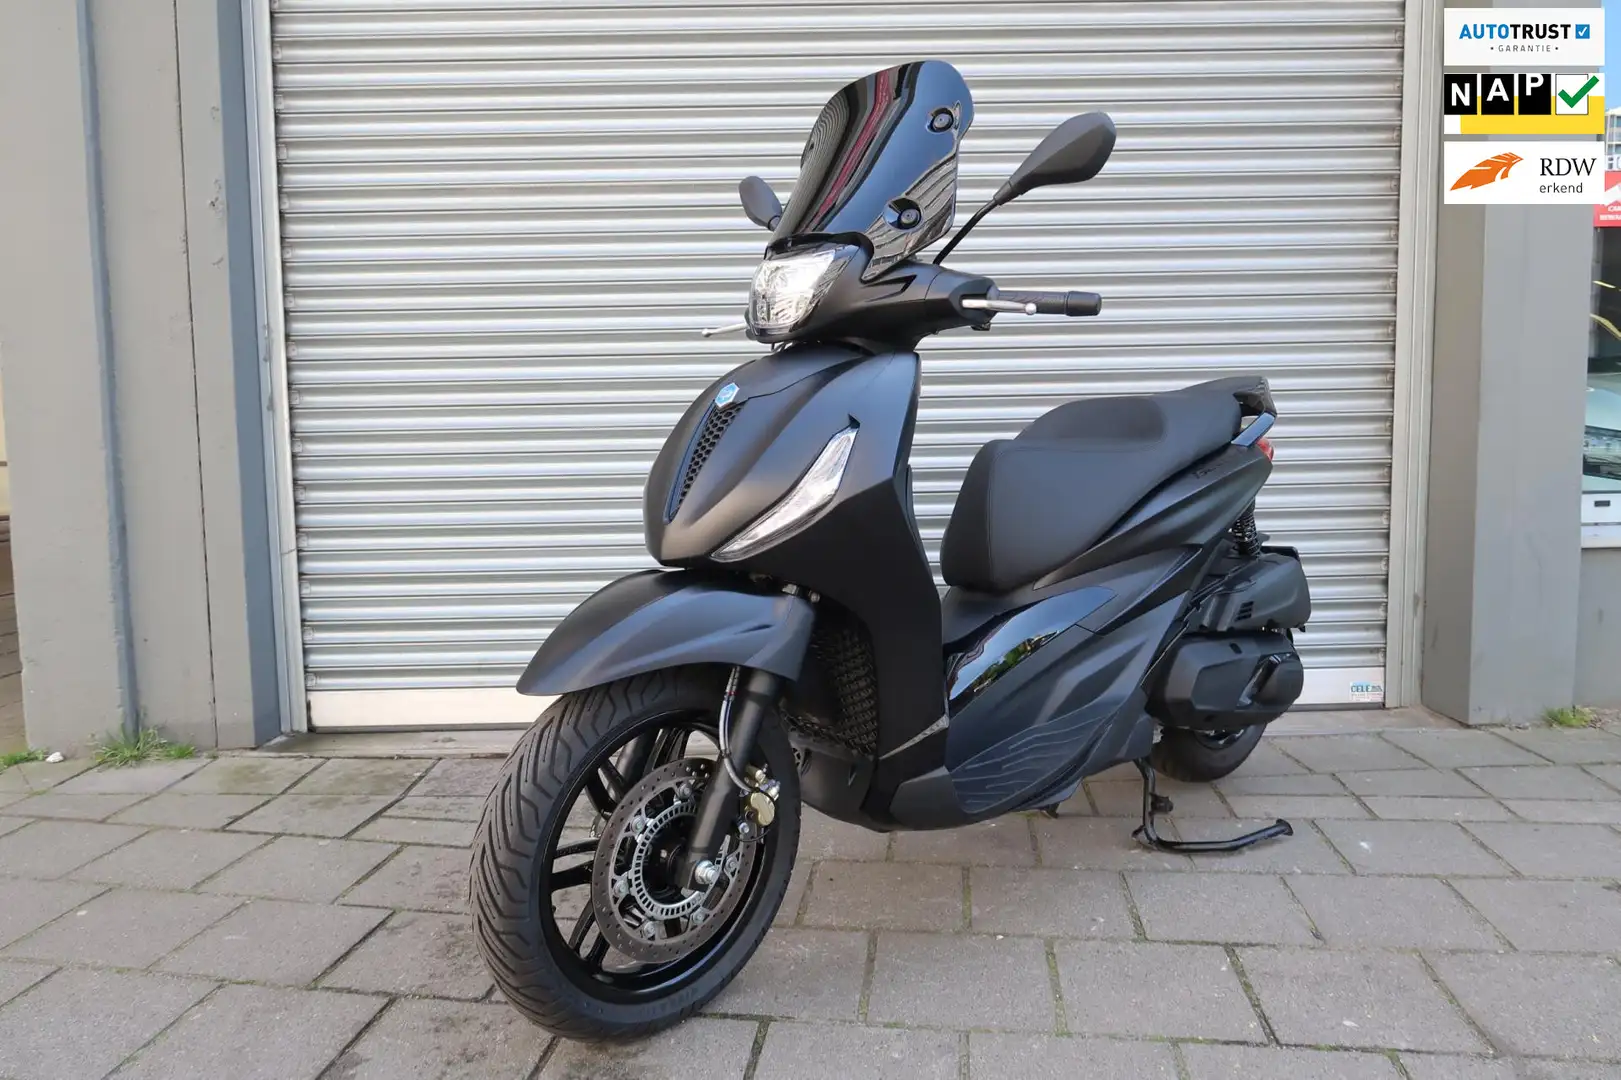 Piaggio Beverly 400 Scooter S HPE 1214KM NL MOTOR Noir - 1